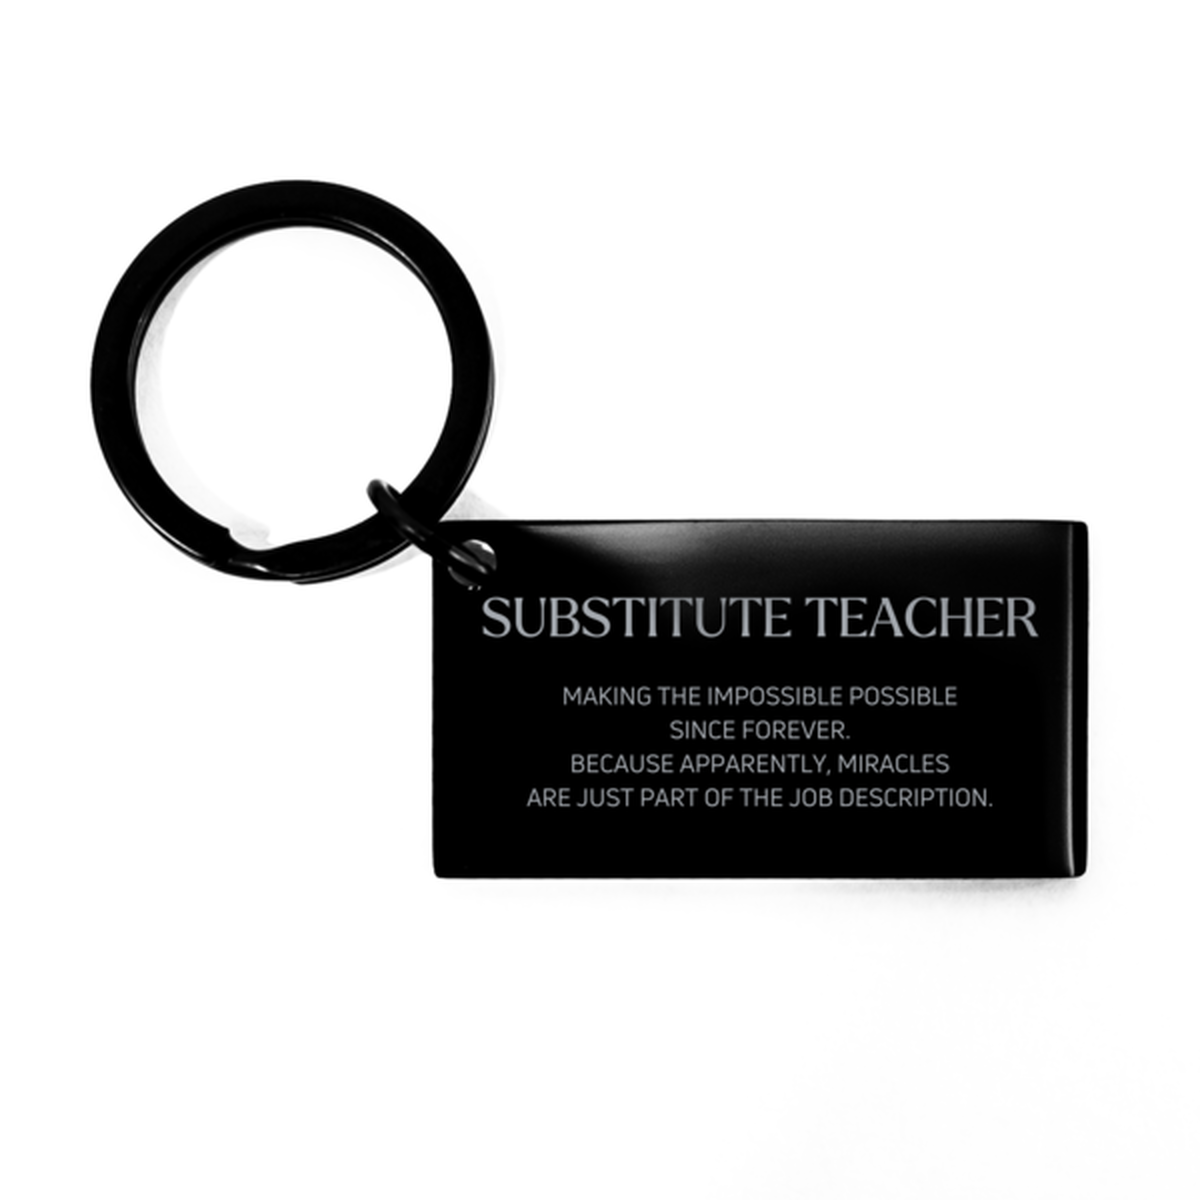 Funny Substitute Teacher Gifts, Miracles are just part of the job description, Inspirational Birthday Keychain For Substitute Teacher, Men, Women, Coworkers, Friends, Boss